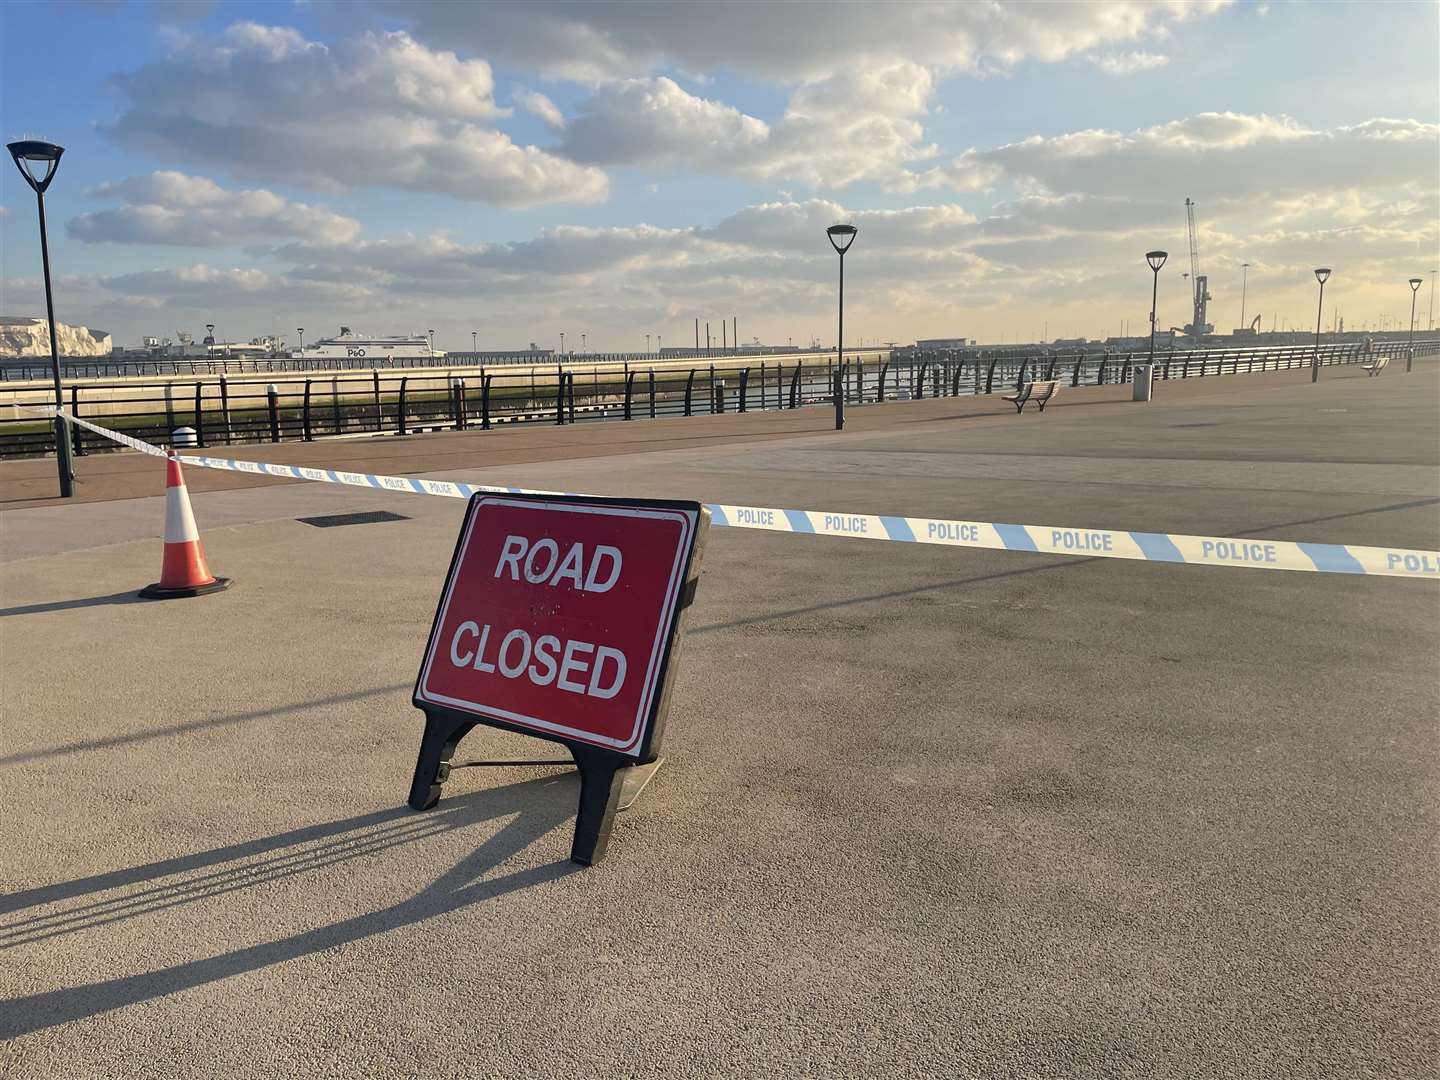 The marina in Dover was taped off by police as the search continued